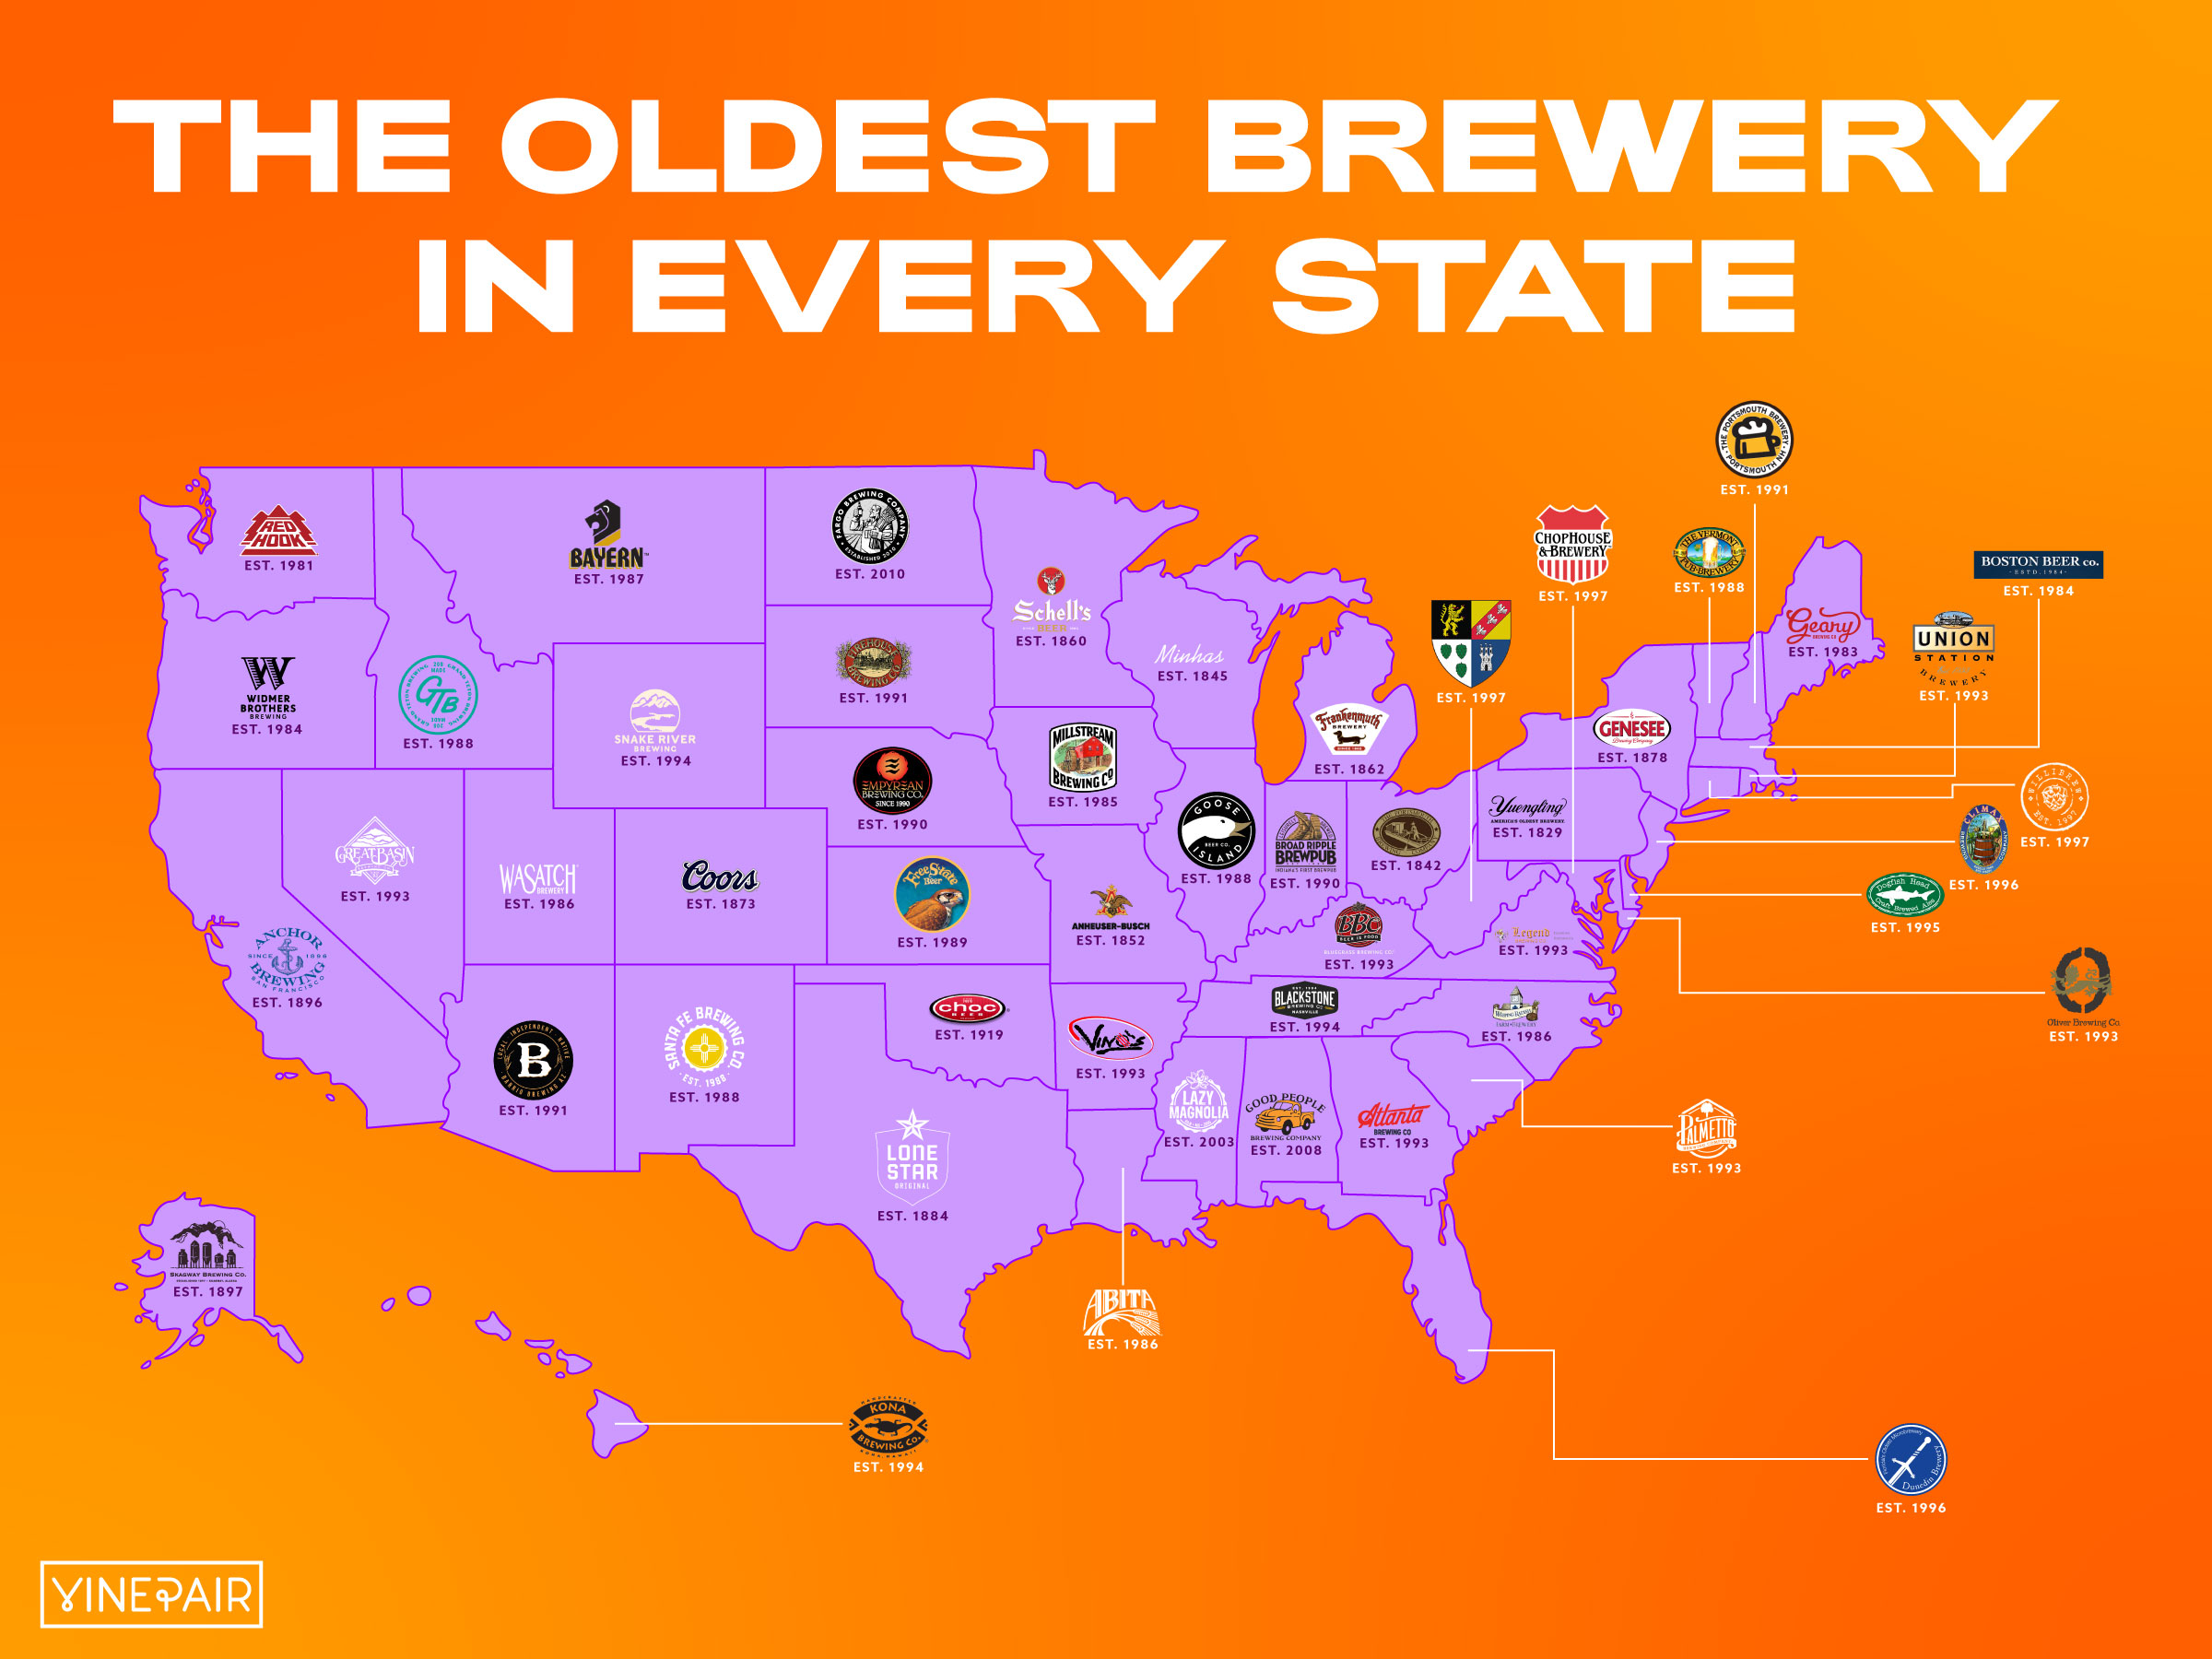 This map documents the oldest breweries in every state.